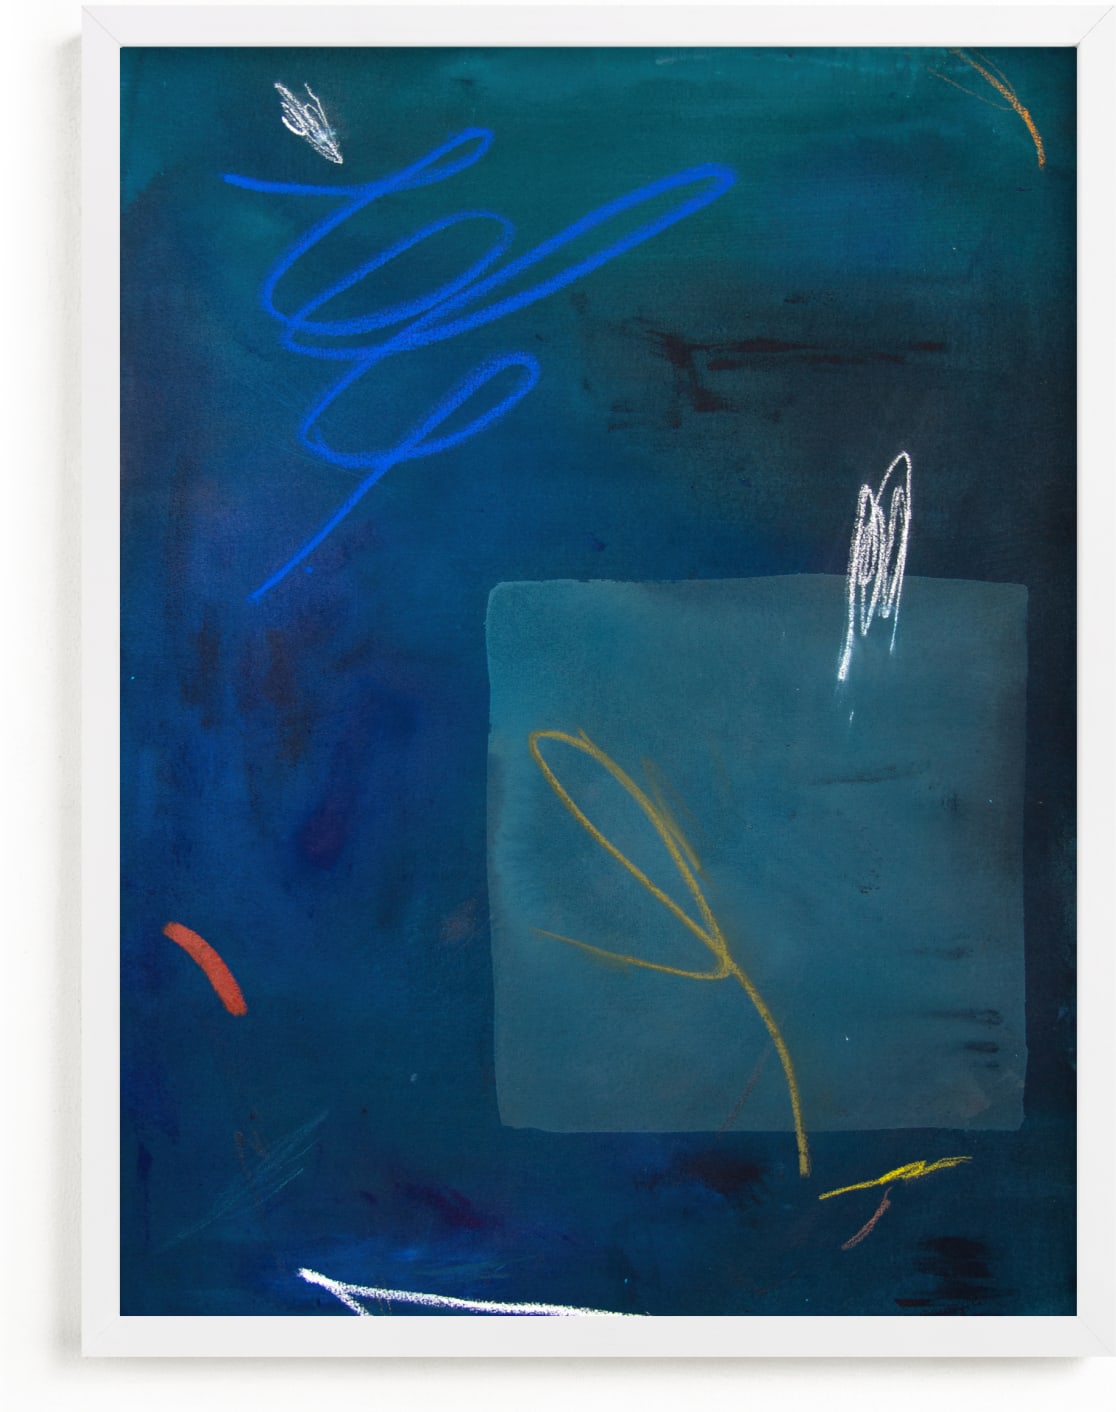 This is a blue art by Keren Toledano called BAIT & SWITCH.